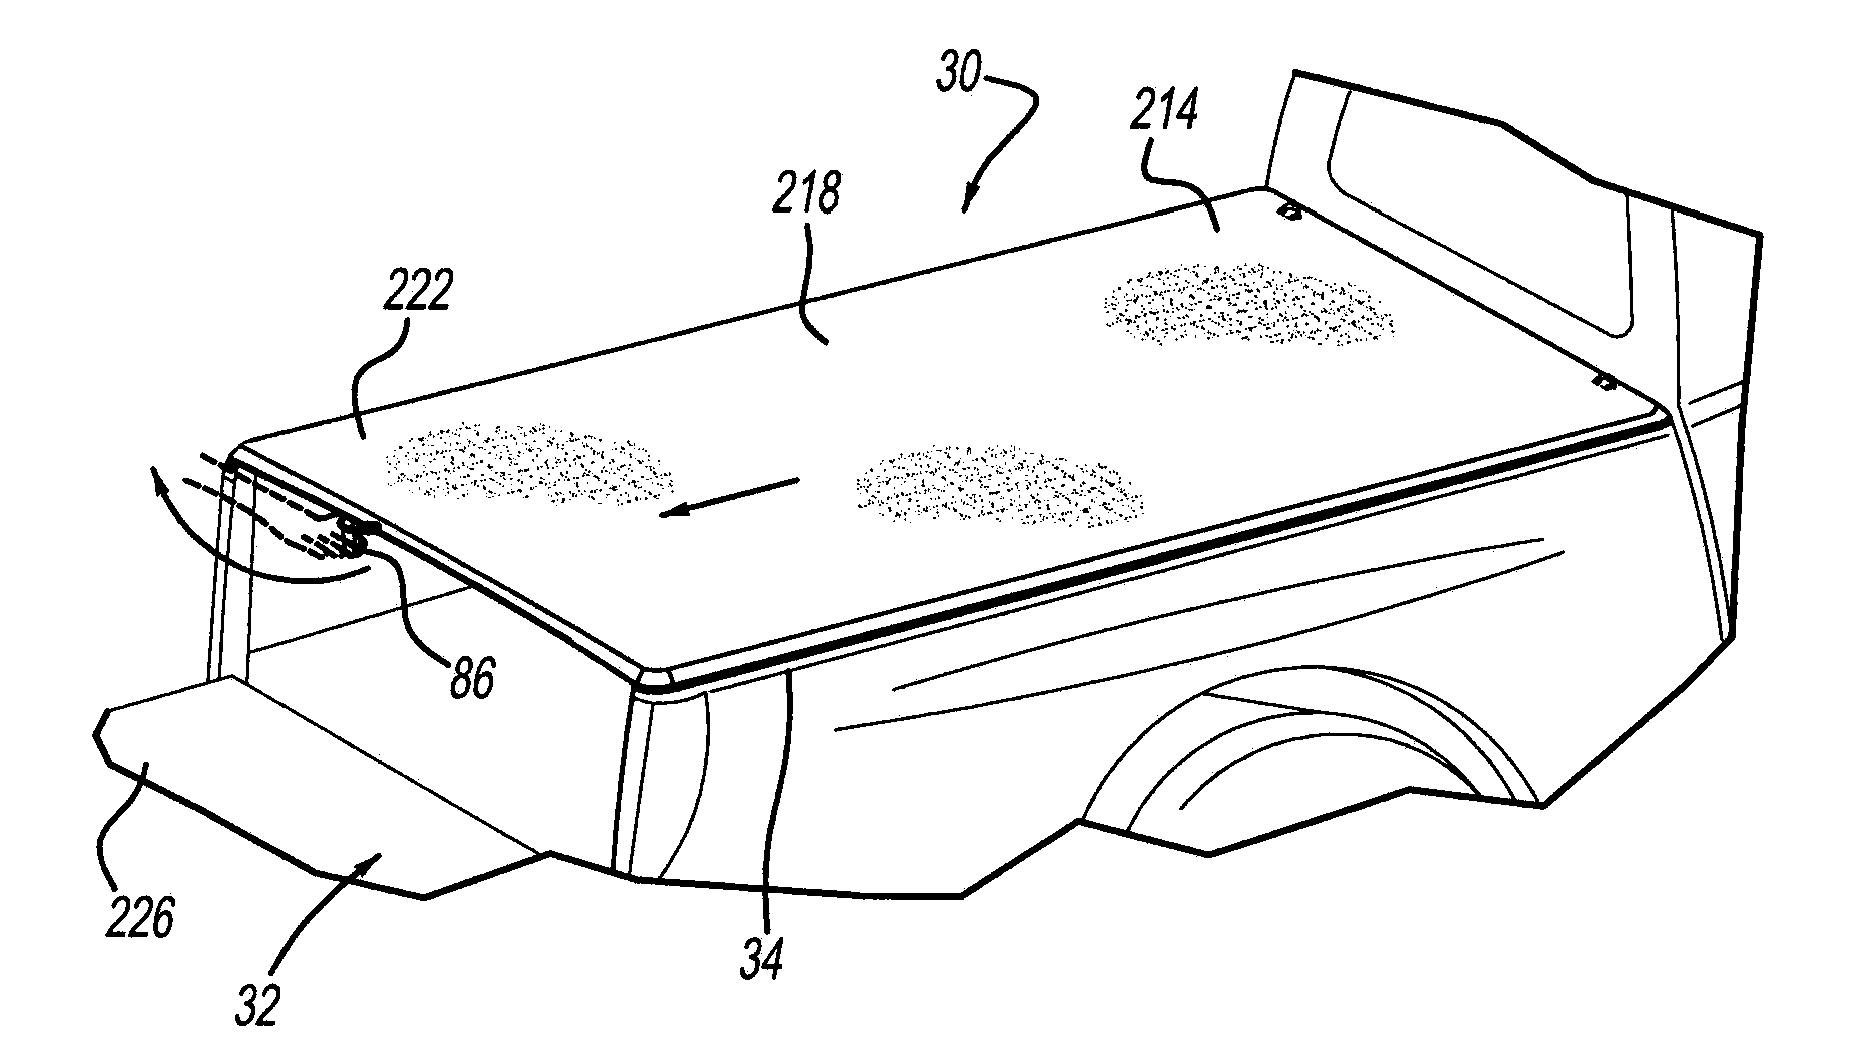 Tonneau cover apparatus for a pickup truck bed